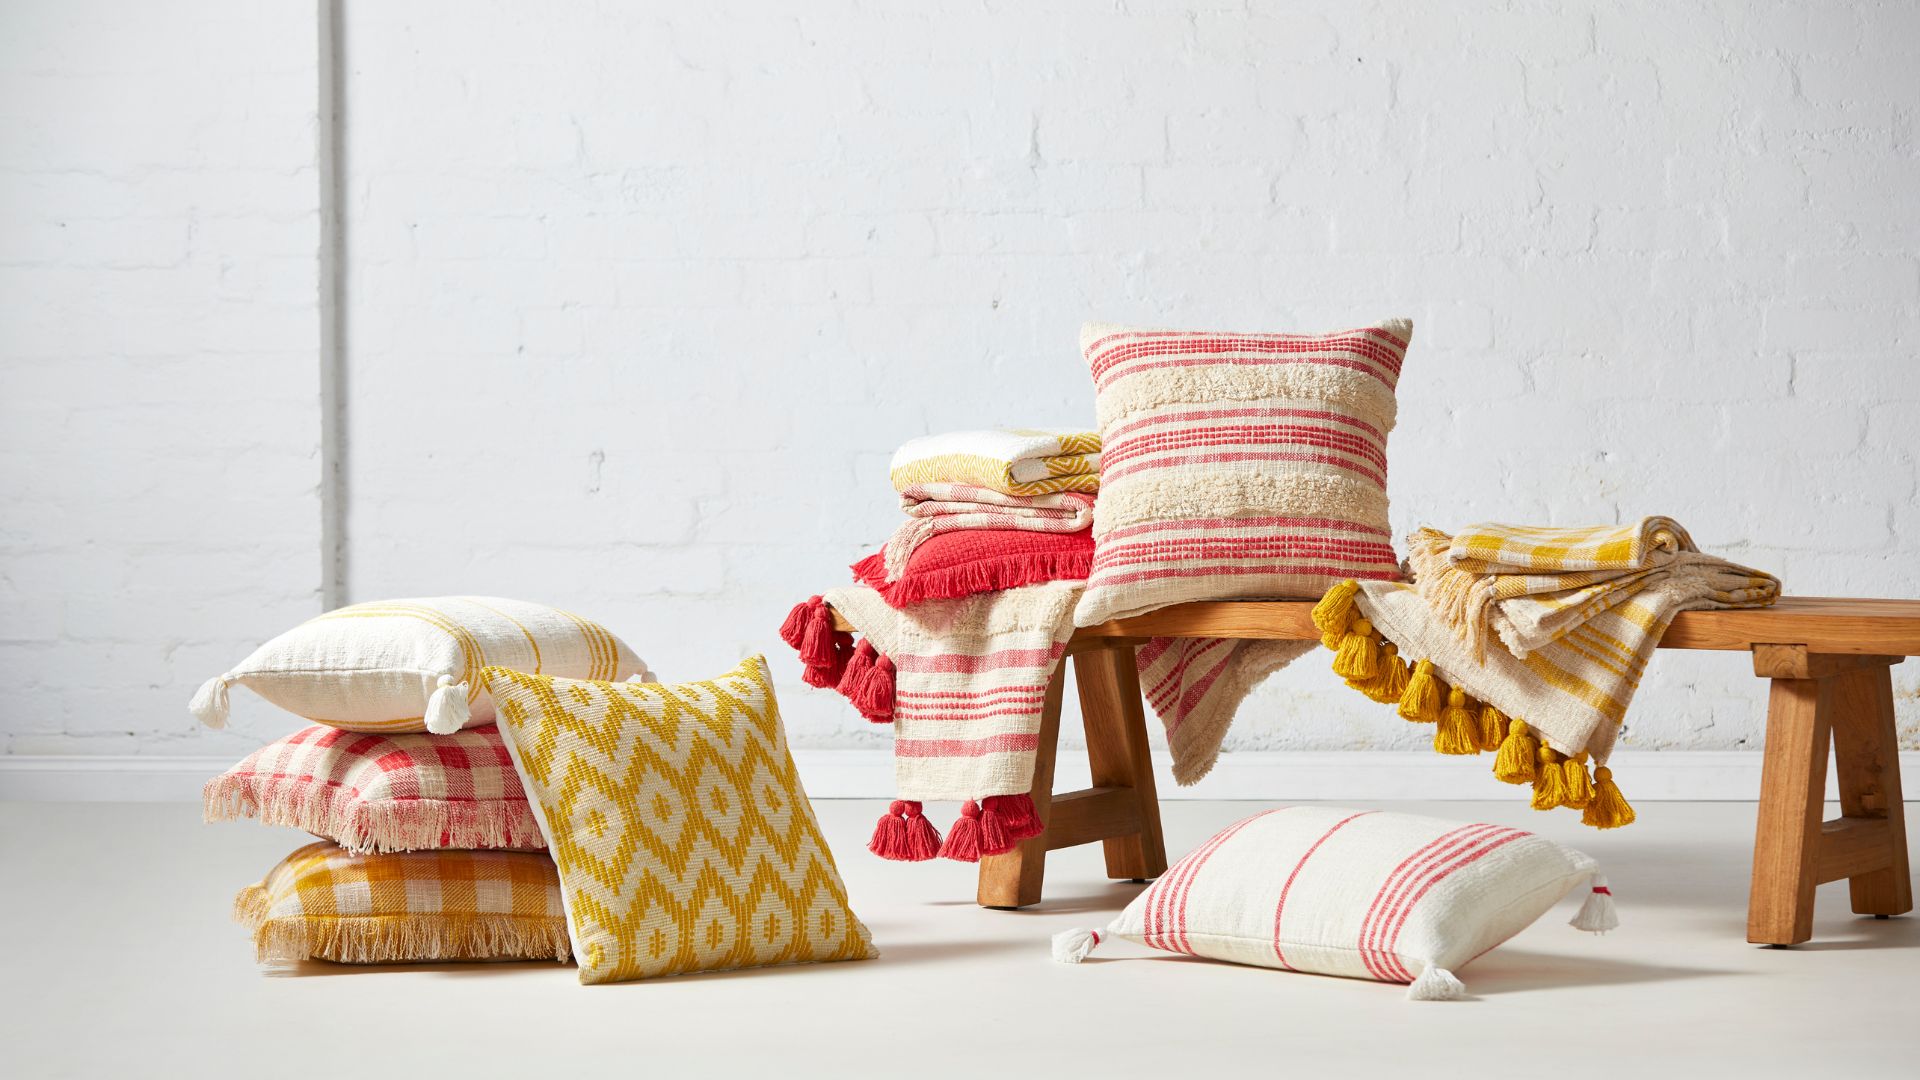 Mustard yellow and berry red stripe, gingham and geometric patterned cushions